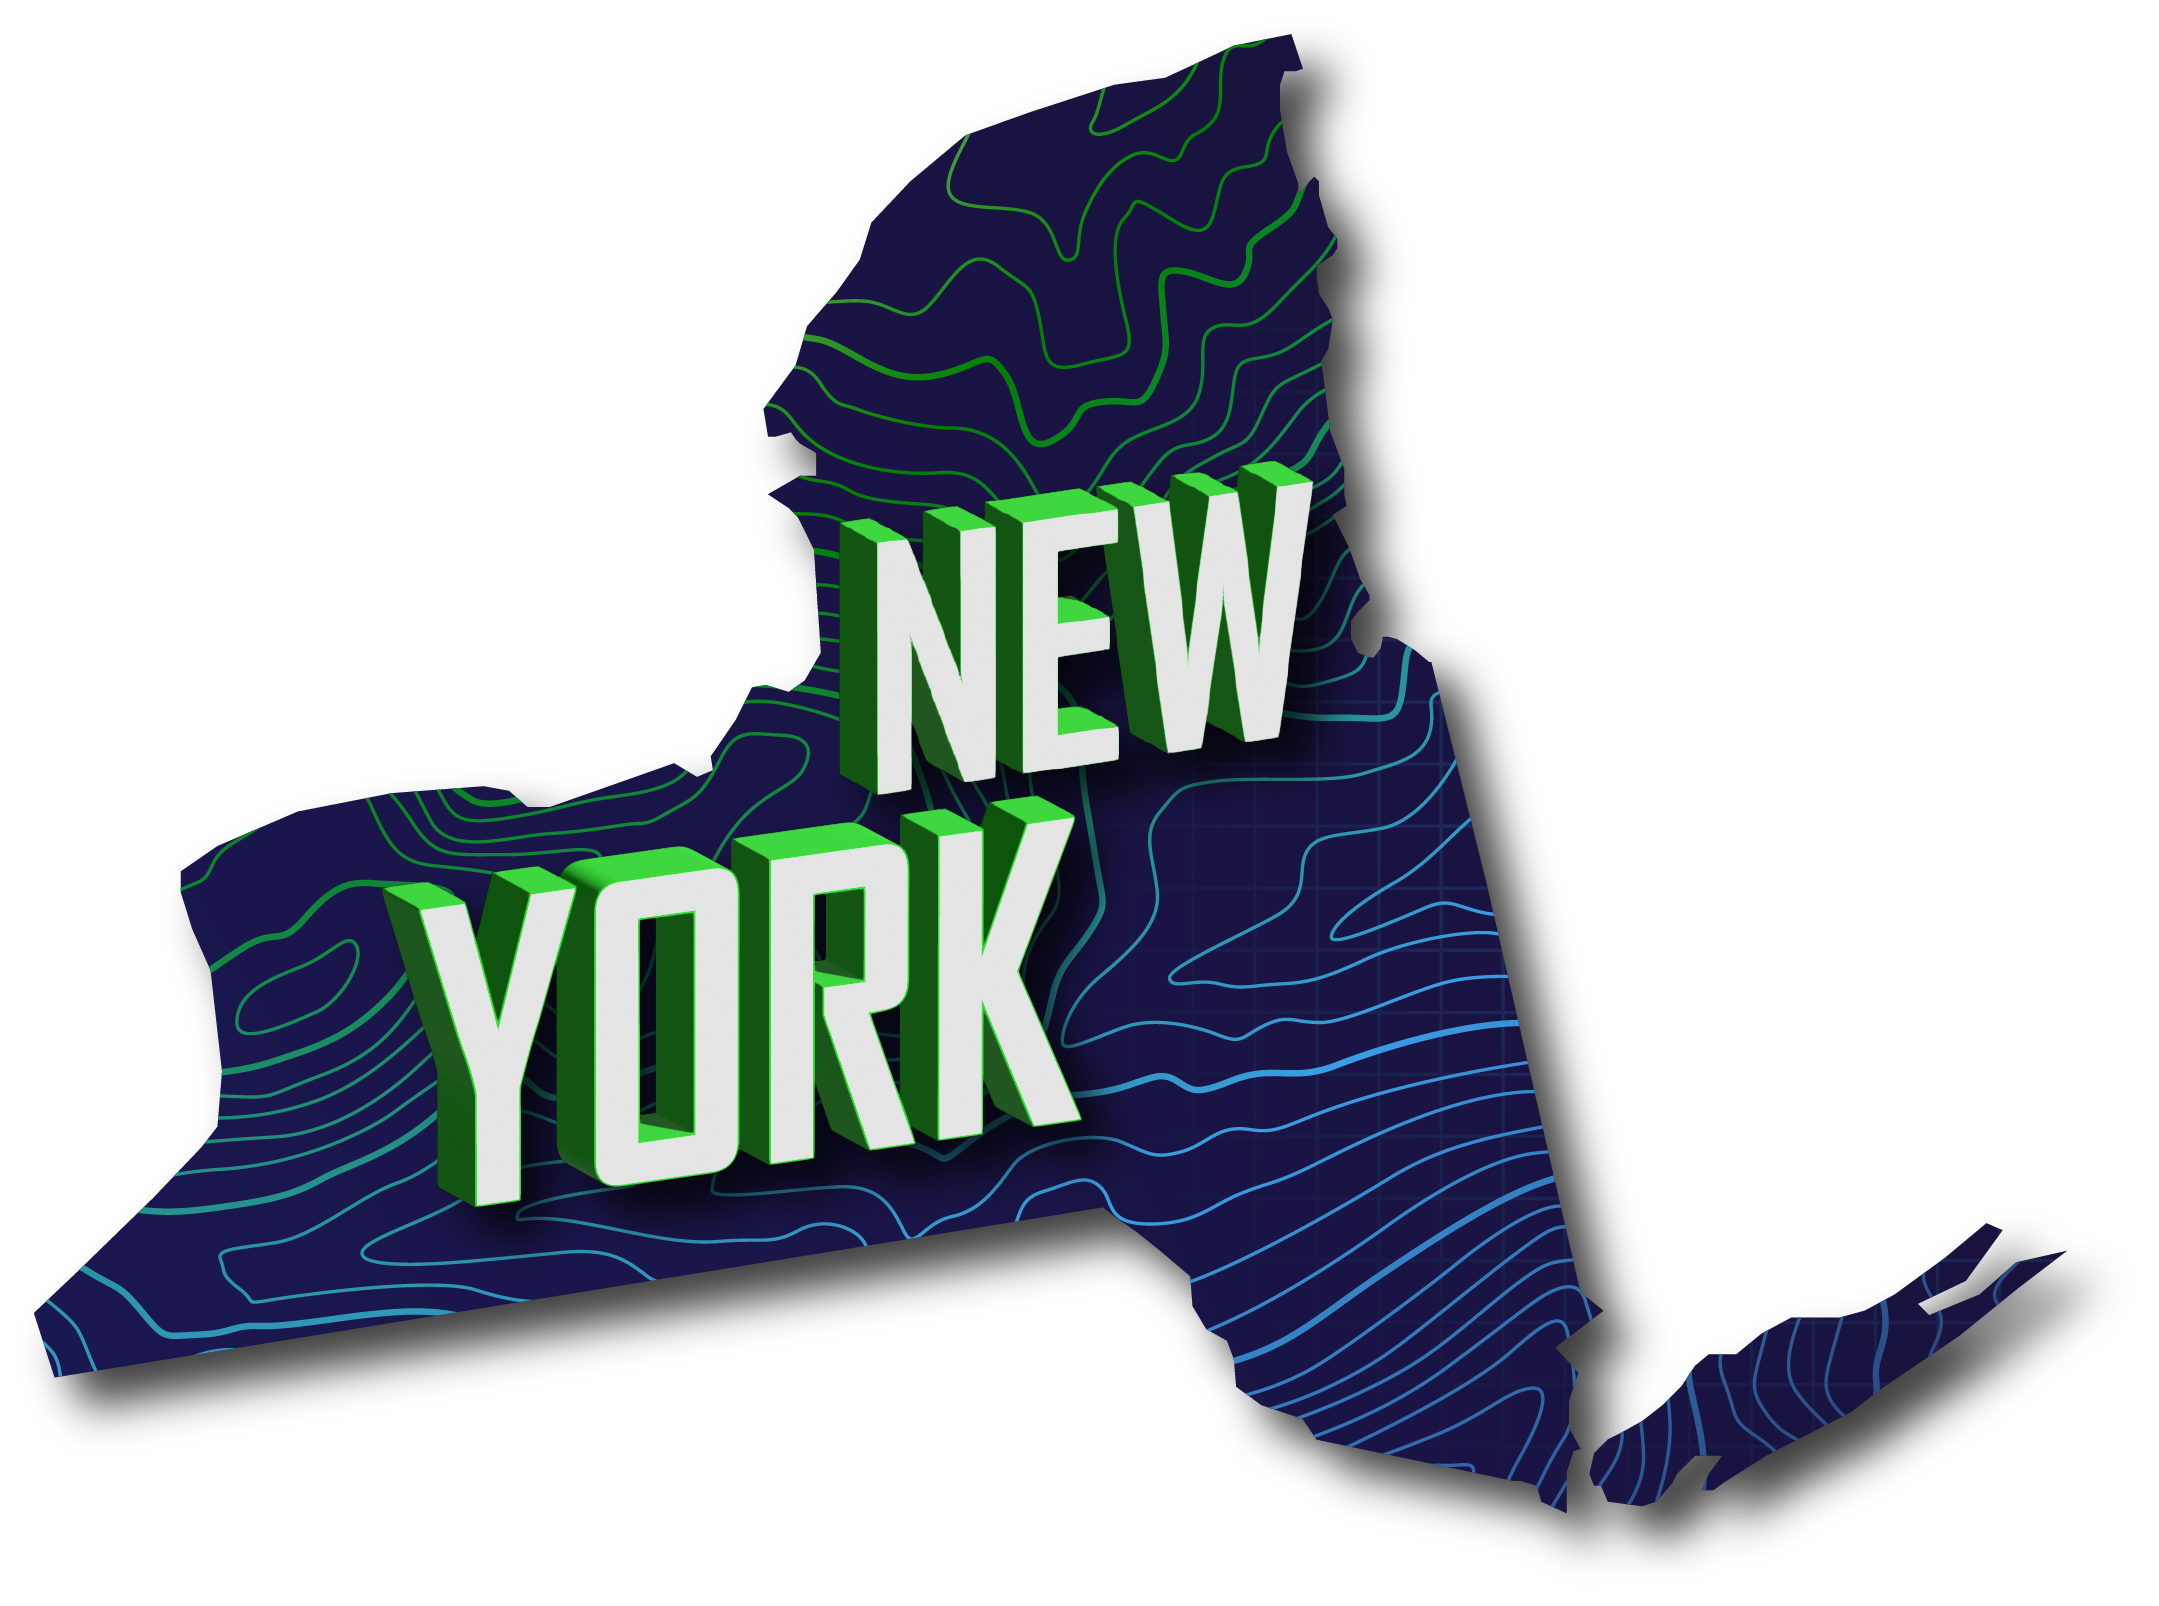 Shape of New York with topographic pattern and words NEW YORK written across it